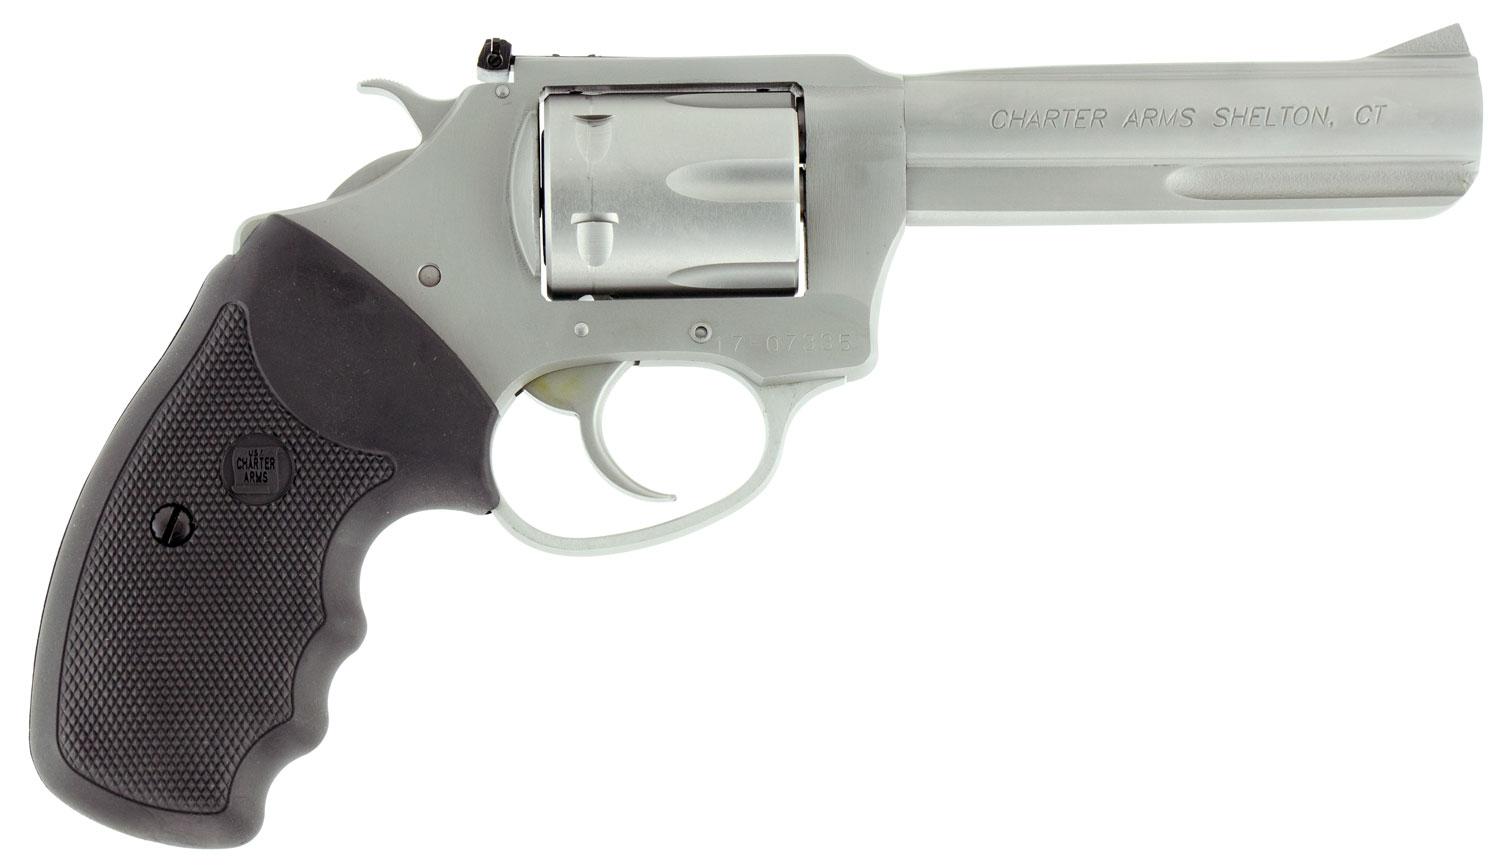 Charter Pathfinder Target Revolver 72242, 22 Long Rifle (LR), 4.2", Black Rubber Grips, Stainless Finish, 6 Rds